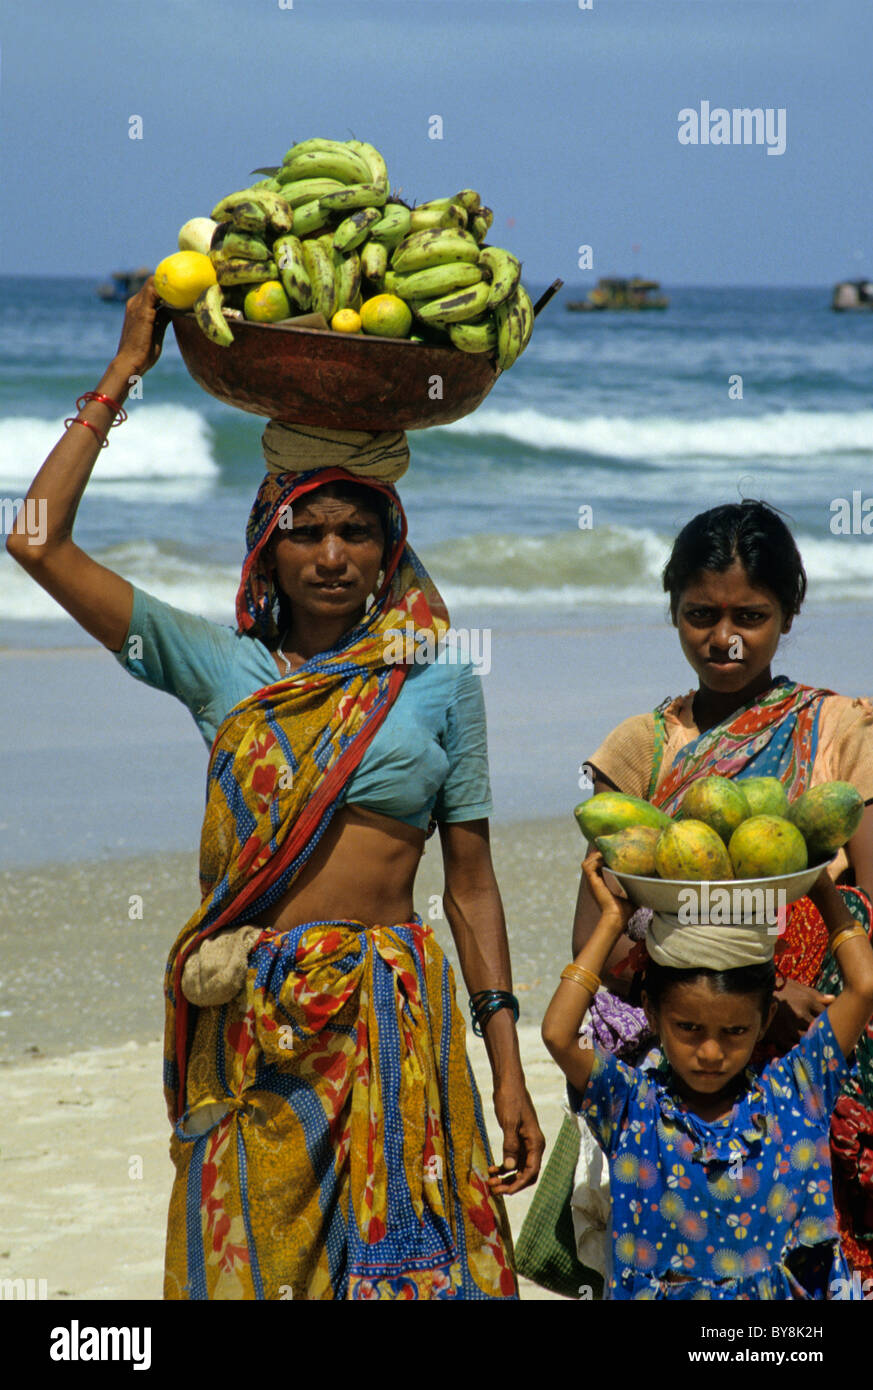 Goa, India - Women and a little girl carrying fruit Stock Photo